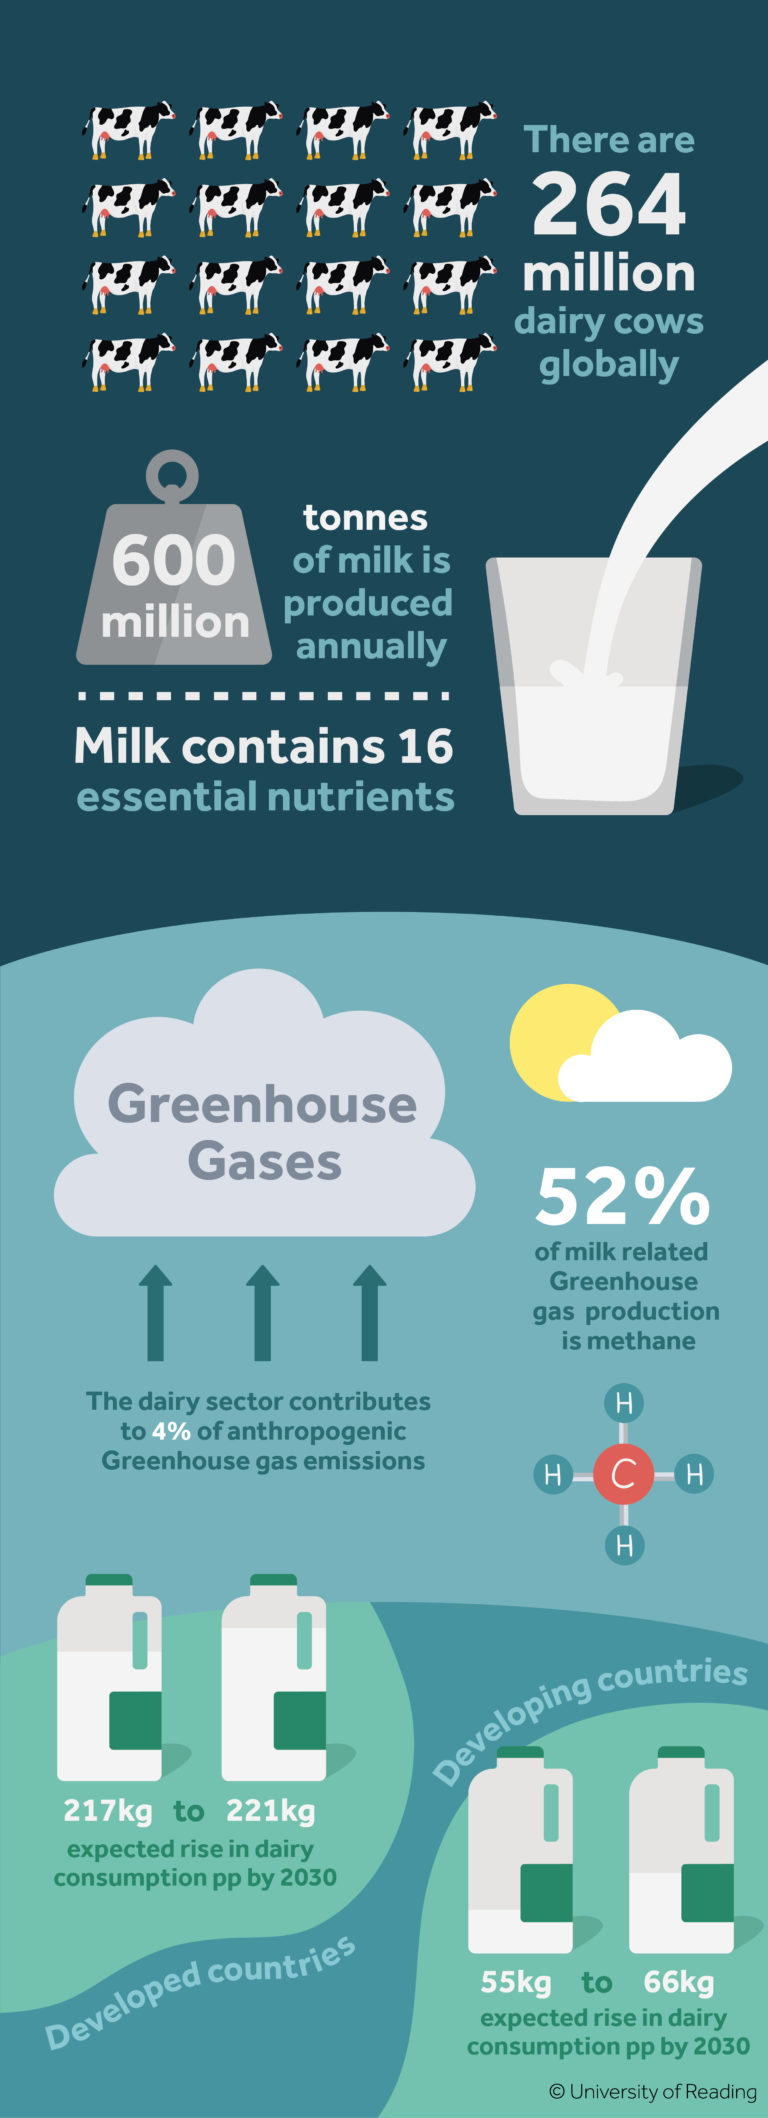 Infographic on dairy farming stating the following: There are 264 million dairy cows globally. 600 million tonnes of milk are produced annually. Milk contains 16 essential nutrients. The dairy sector contributes to 4% of anthropogenic greenhouse gas emissions. 52% of milk related greenhouse gas production is methane. 217kg to 221kg, expected rise in dairy consumption pp by 2030 in developed countries. 55kg to 66kg, expected rise in dairy consumption pp by 2030 in developing countries.